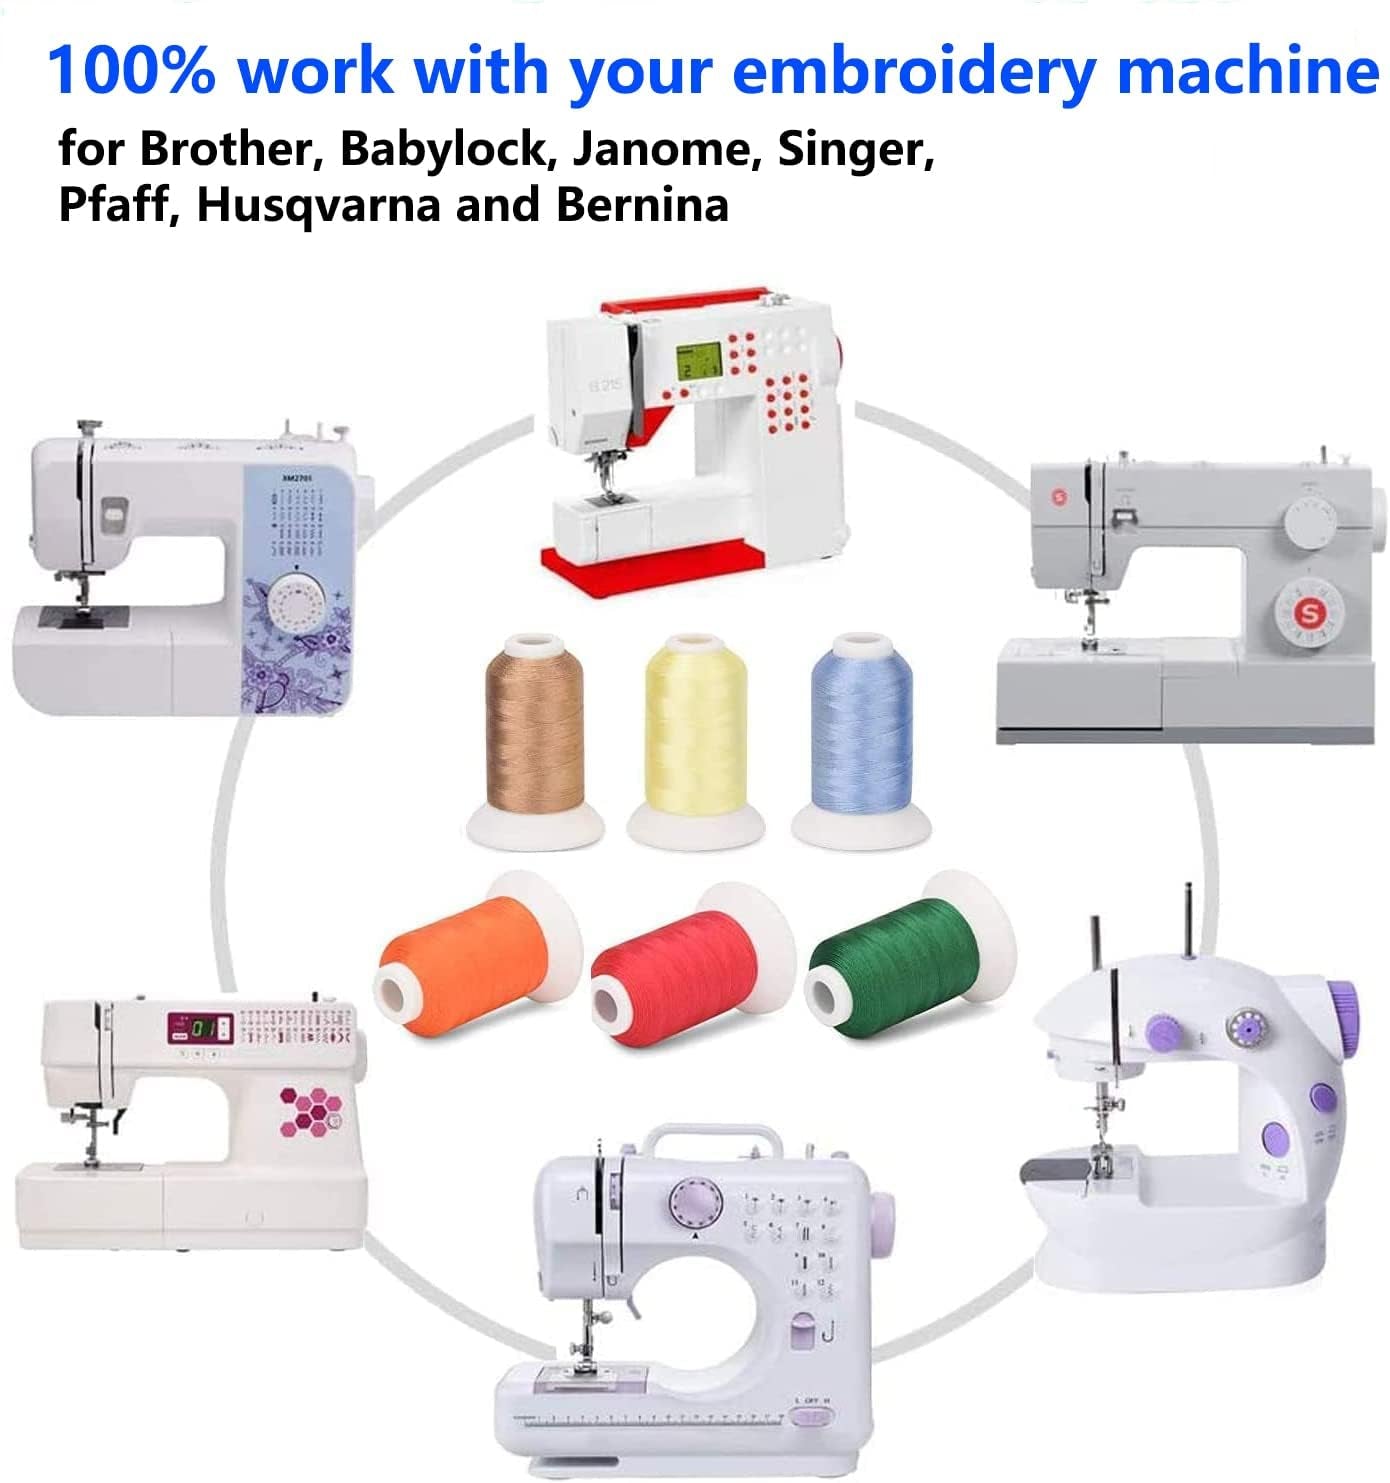 [Anti-Tangle] Embroidery Thread Kit with Organizer Box, All-In-One 63 Colors 100% Polyester Sewing Thread Set for Brother Babylock Janome Embroidery Machine and More